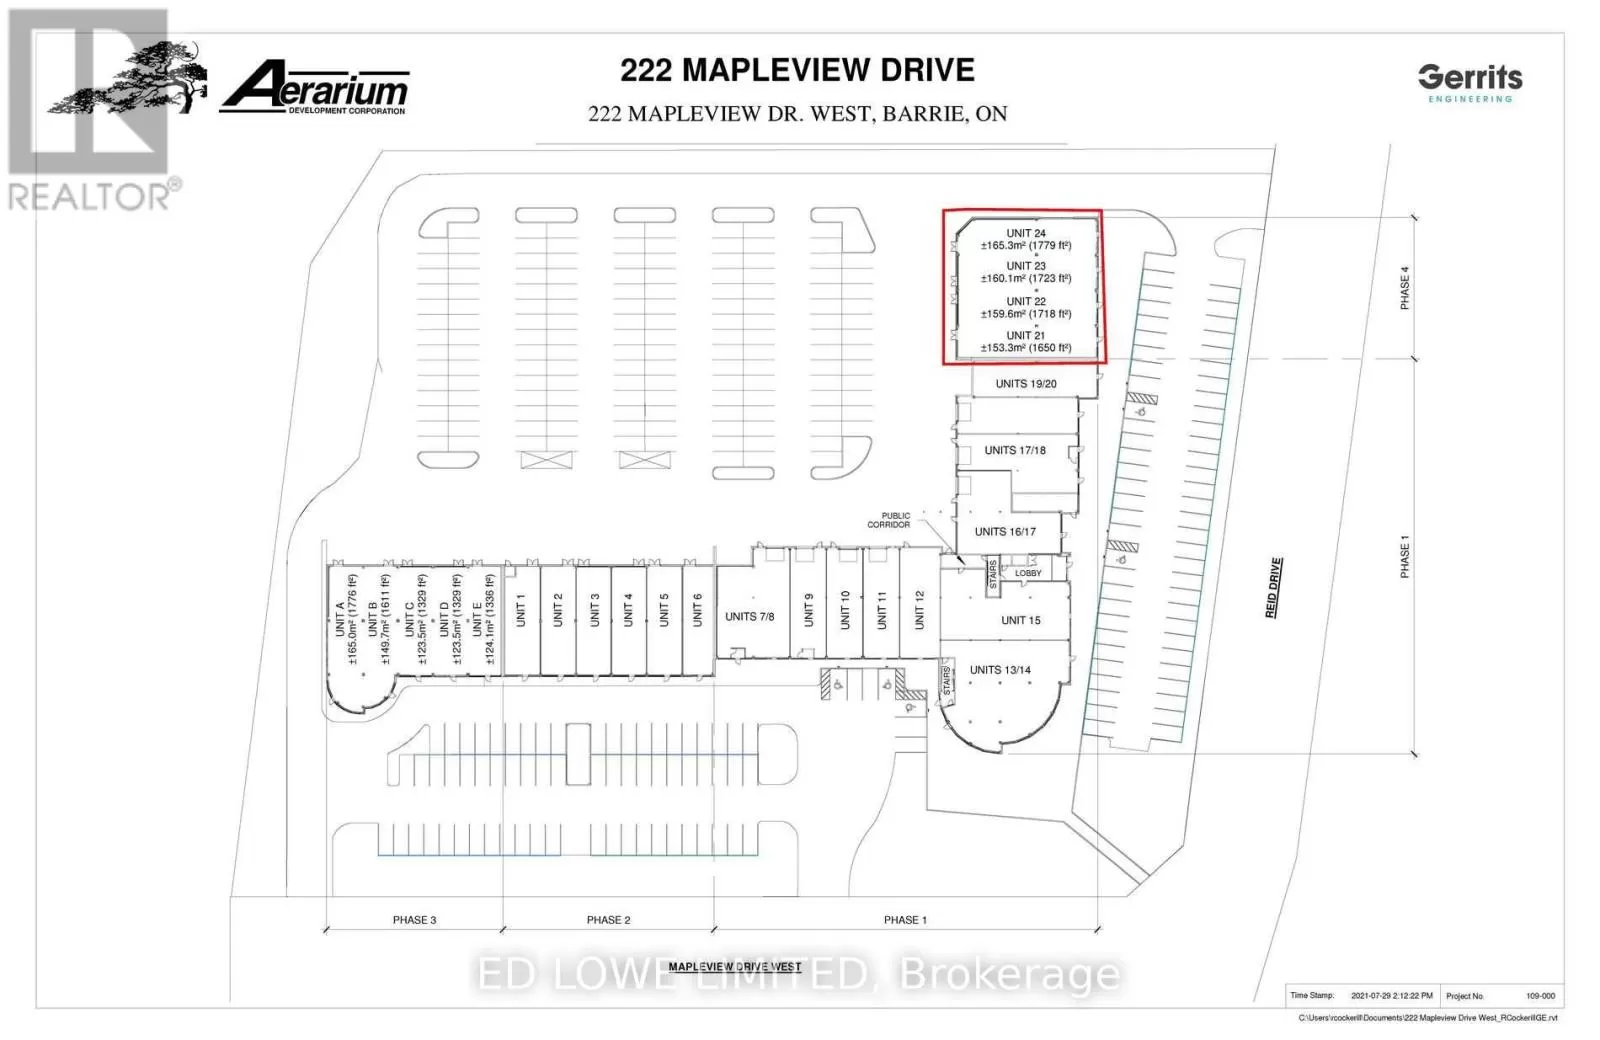 Multi-Tenant Industrial for rent: 21 & 22 - 222 Mapleview Drive W, Barrie, Ontario L4N 9E7